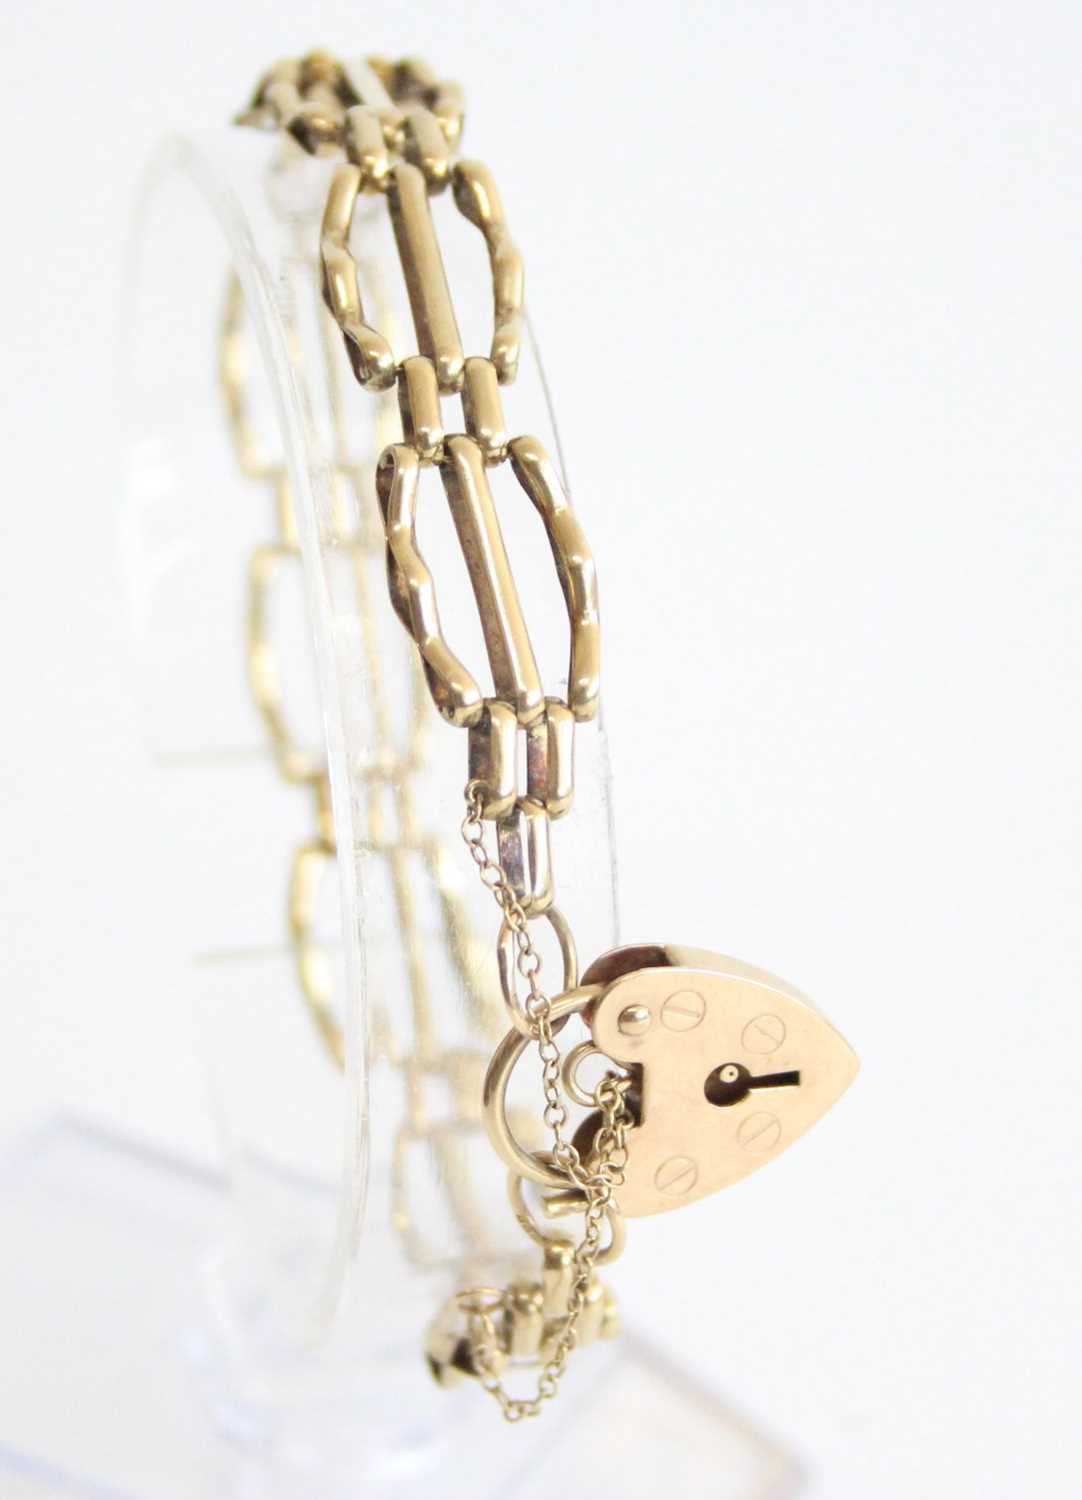 A 9ct gold gatelink bracelet, having heart shaped padlock clasp and safety chain, 9.2g, 16cm